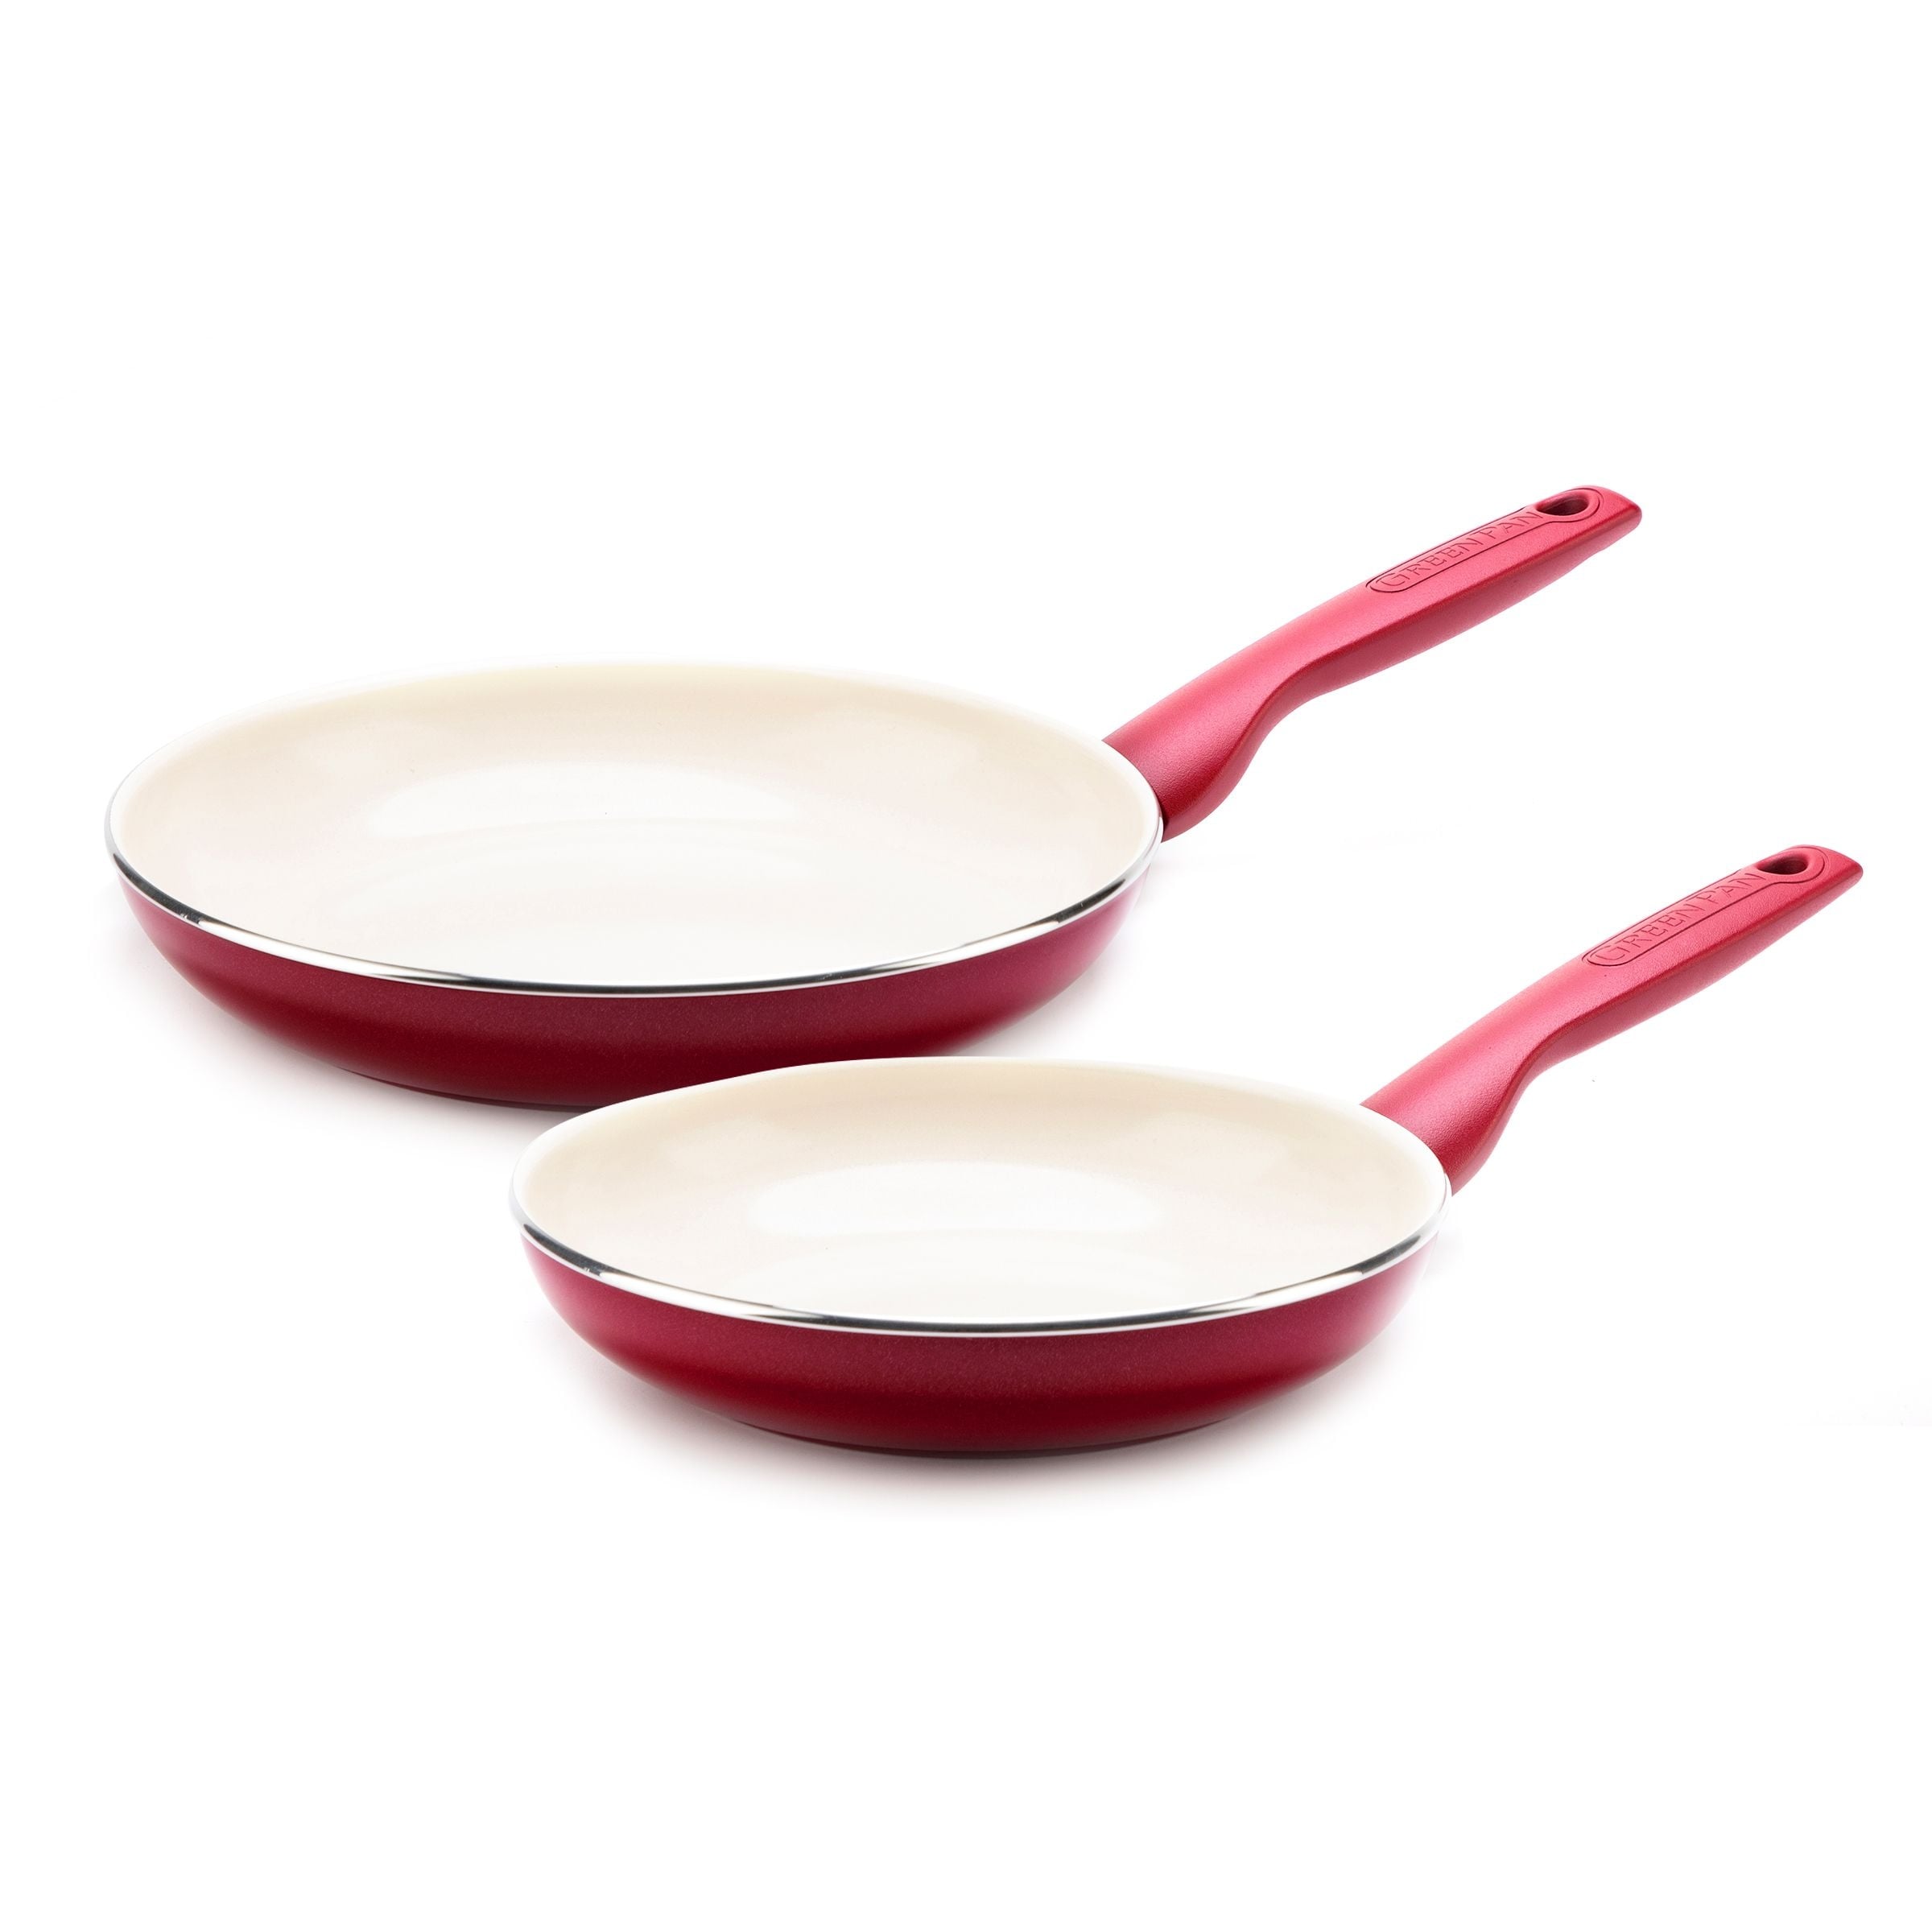 https://ak1.ostkcdn.com/images/products/is/images/direct/ffbe55a2bebfd170cb21881eeaf57abb26cba863/GreenPan-Rio-Ceramic-Non-Stick-2-Piece-Frypan-Set%2C-8-and-10-Inch%2C-Red.jpg